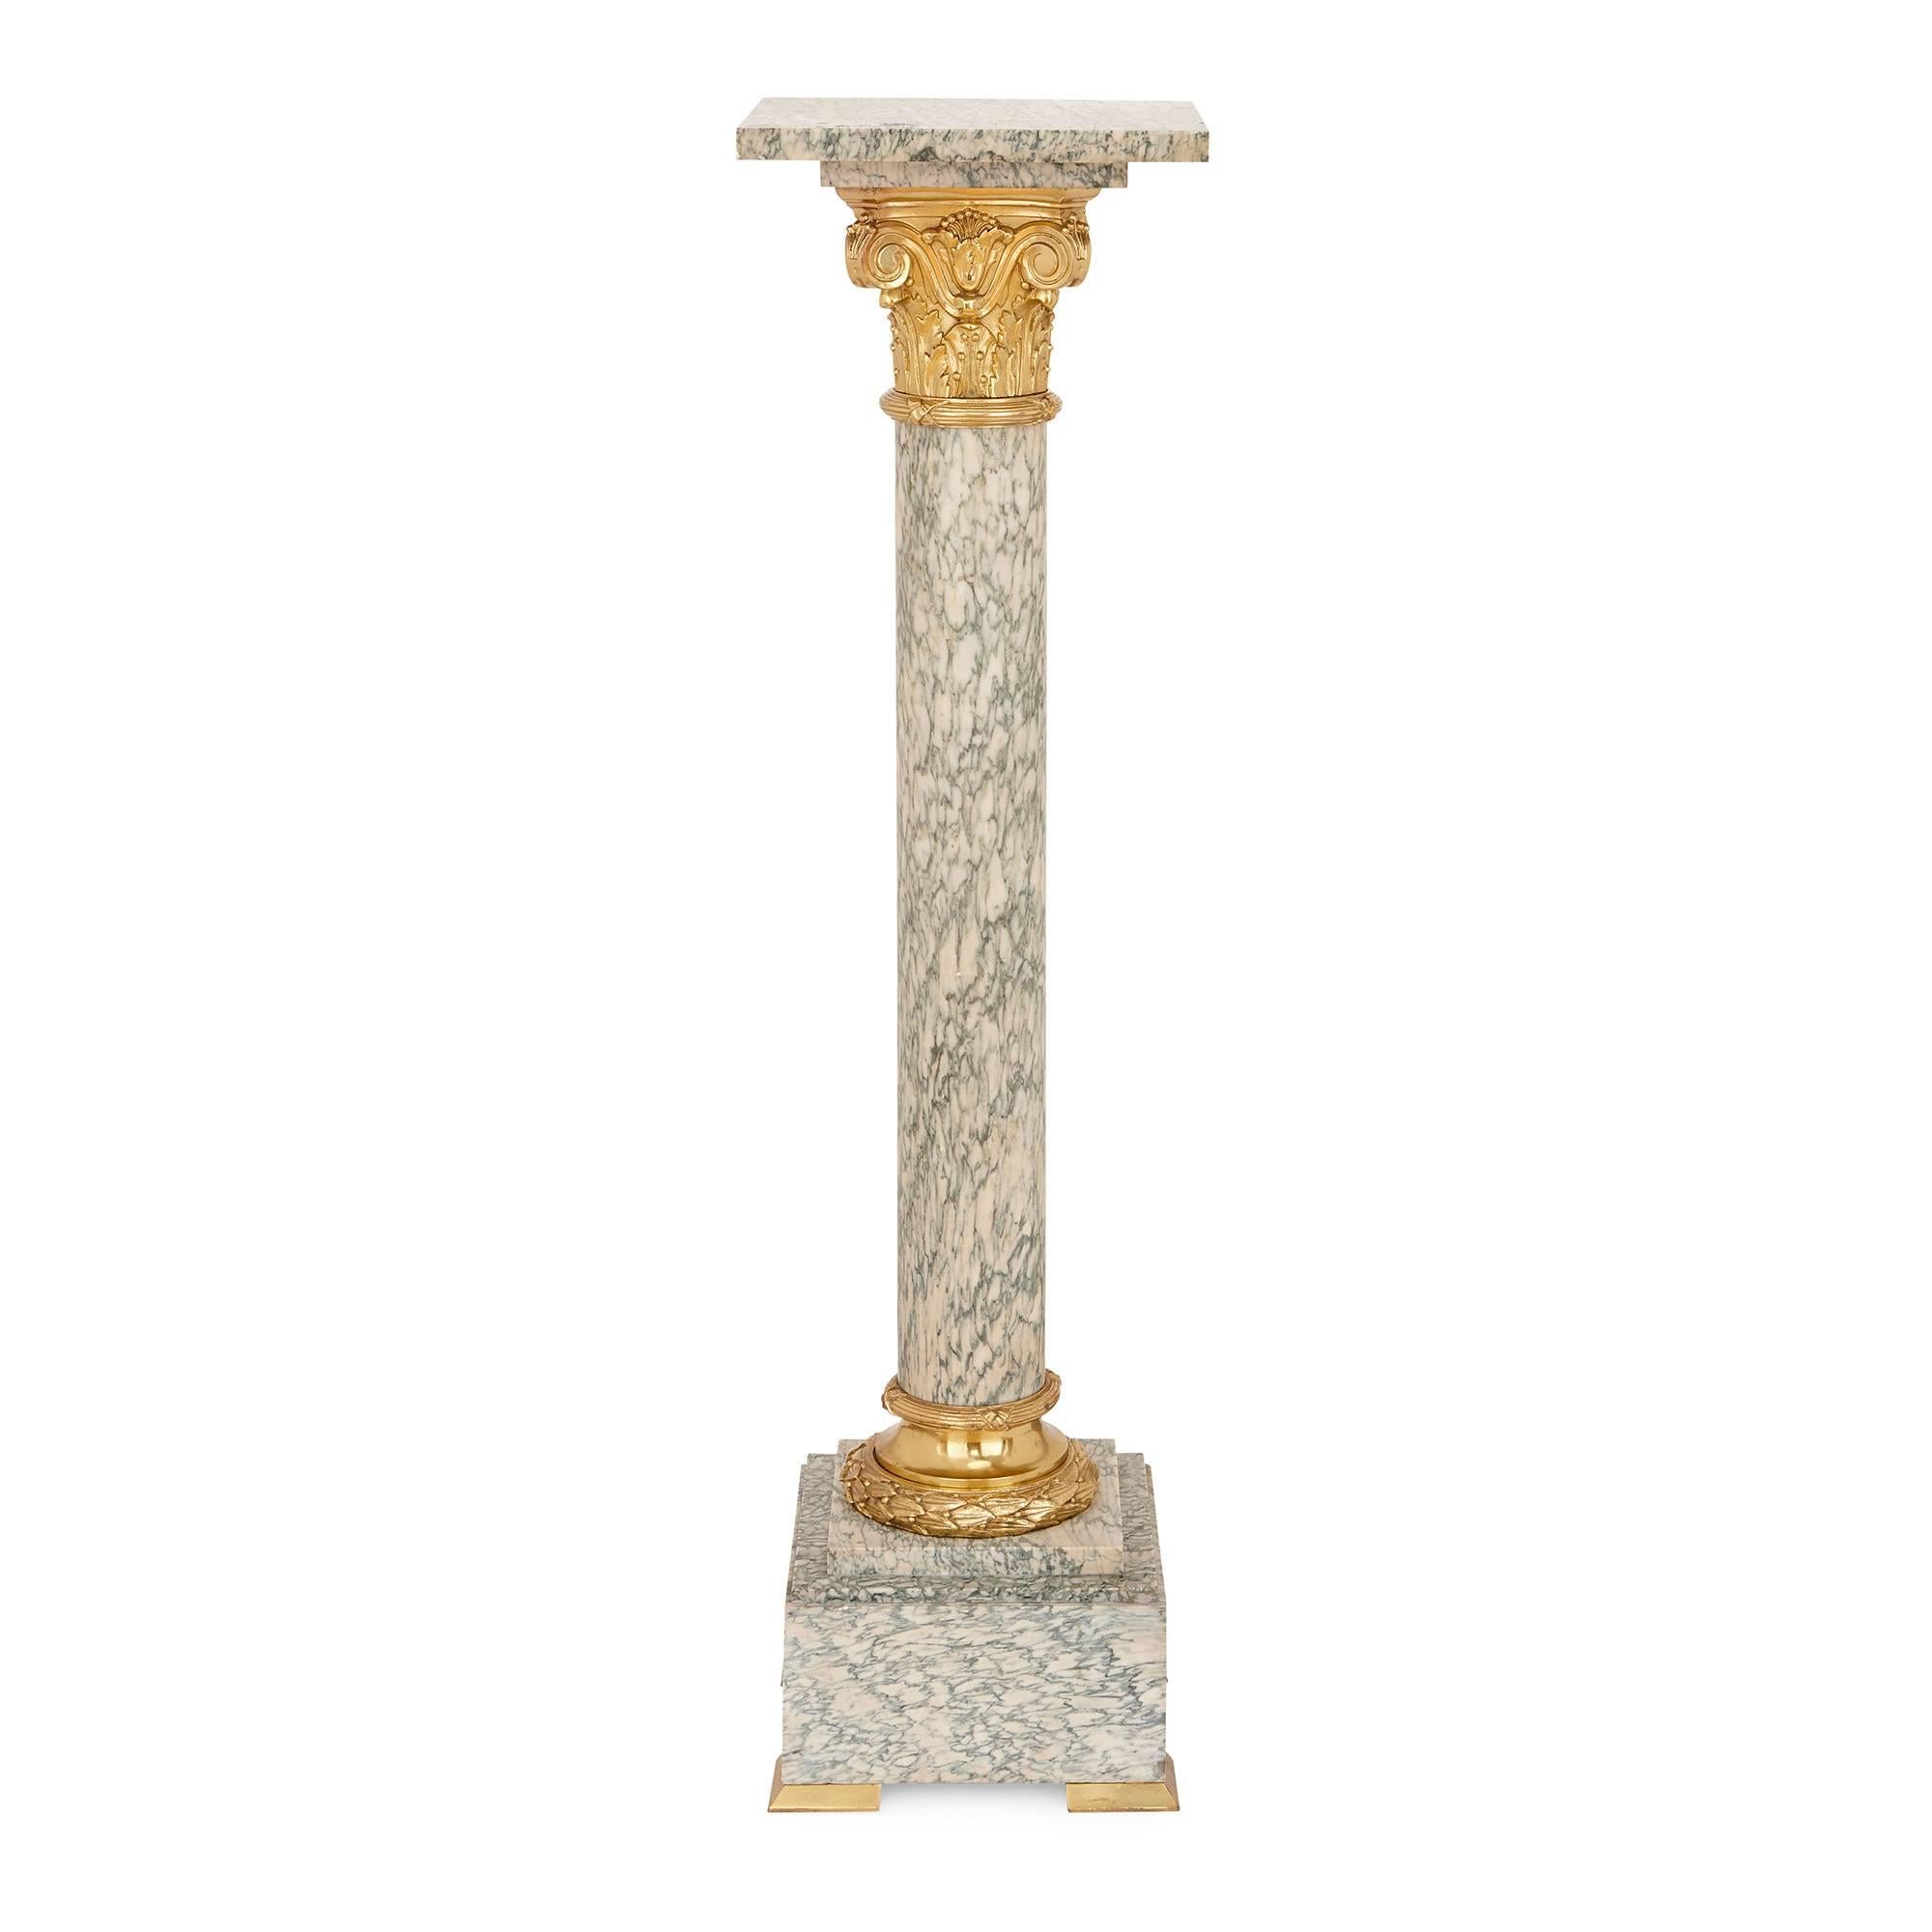 This pair of marble and gilt bronze pedestals represent a fine example of 19th century neoclassical design. Featuring beautiful green and white Vert d'Estours marble, each pedestal has a central marble column with Corinthian capital in gilt bronze,